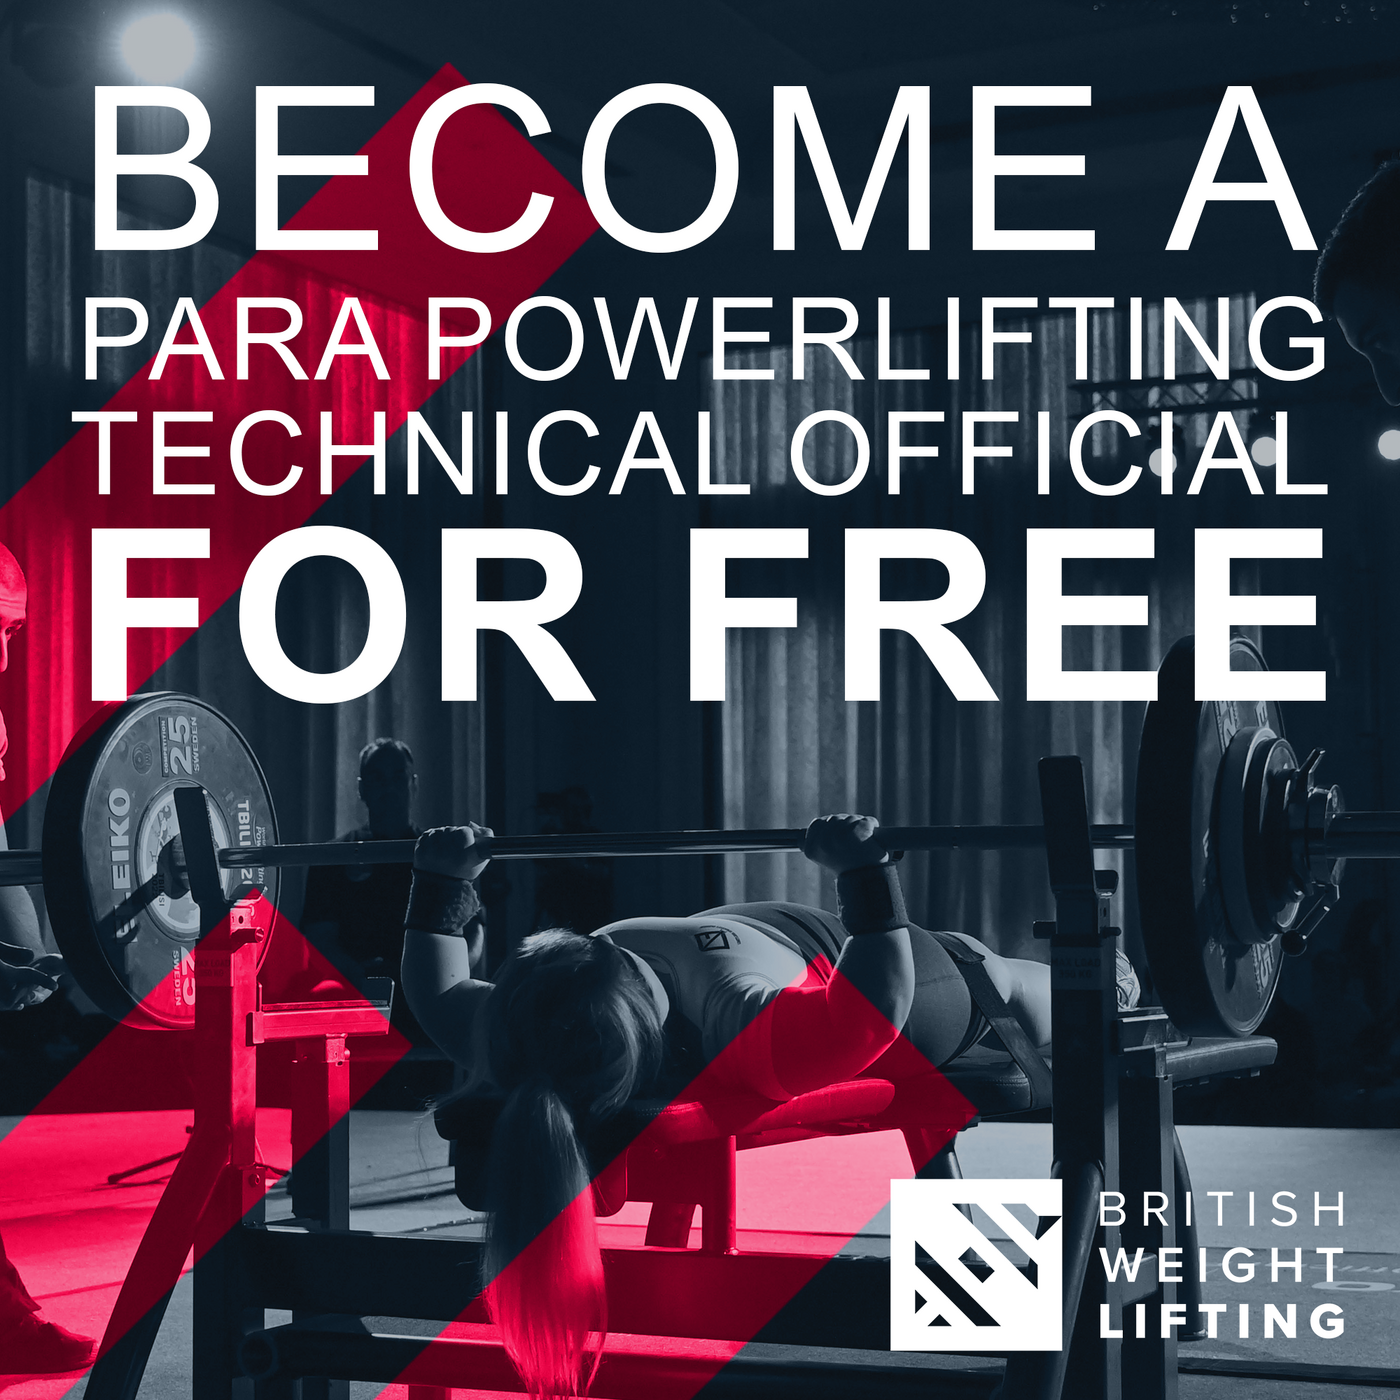 Join the para powerlifting Technical Officials training programme